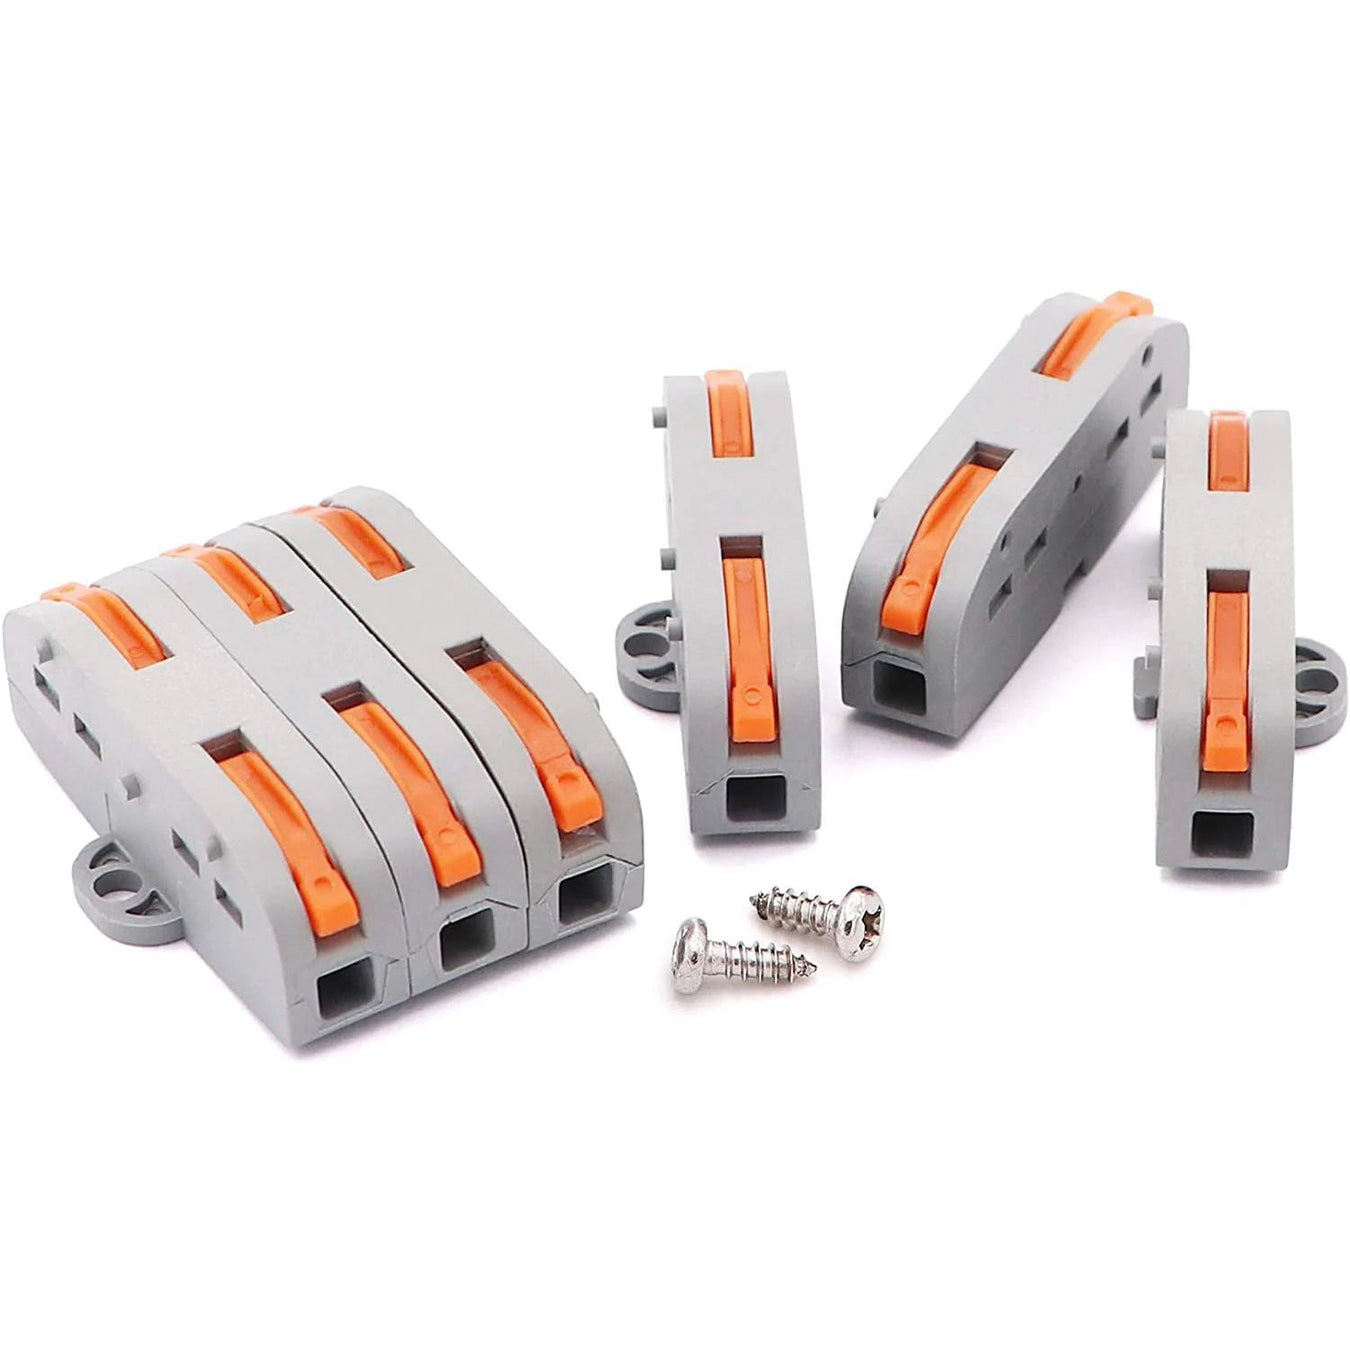 Cable Joint Kits and Connectors